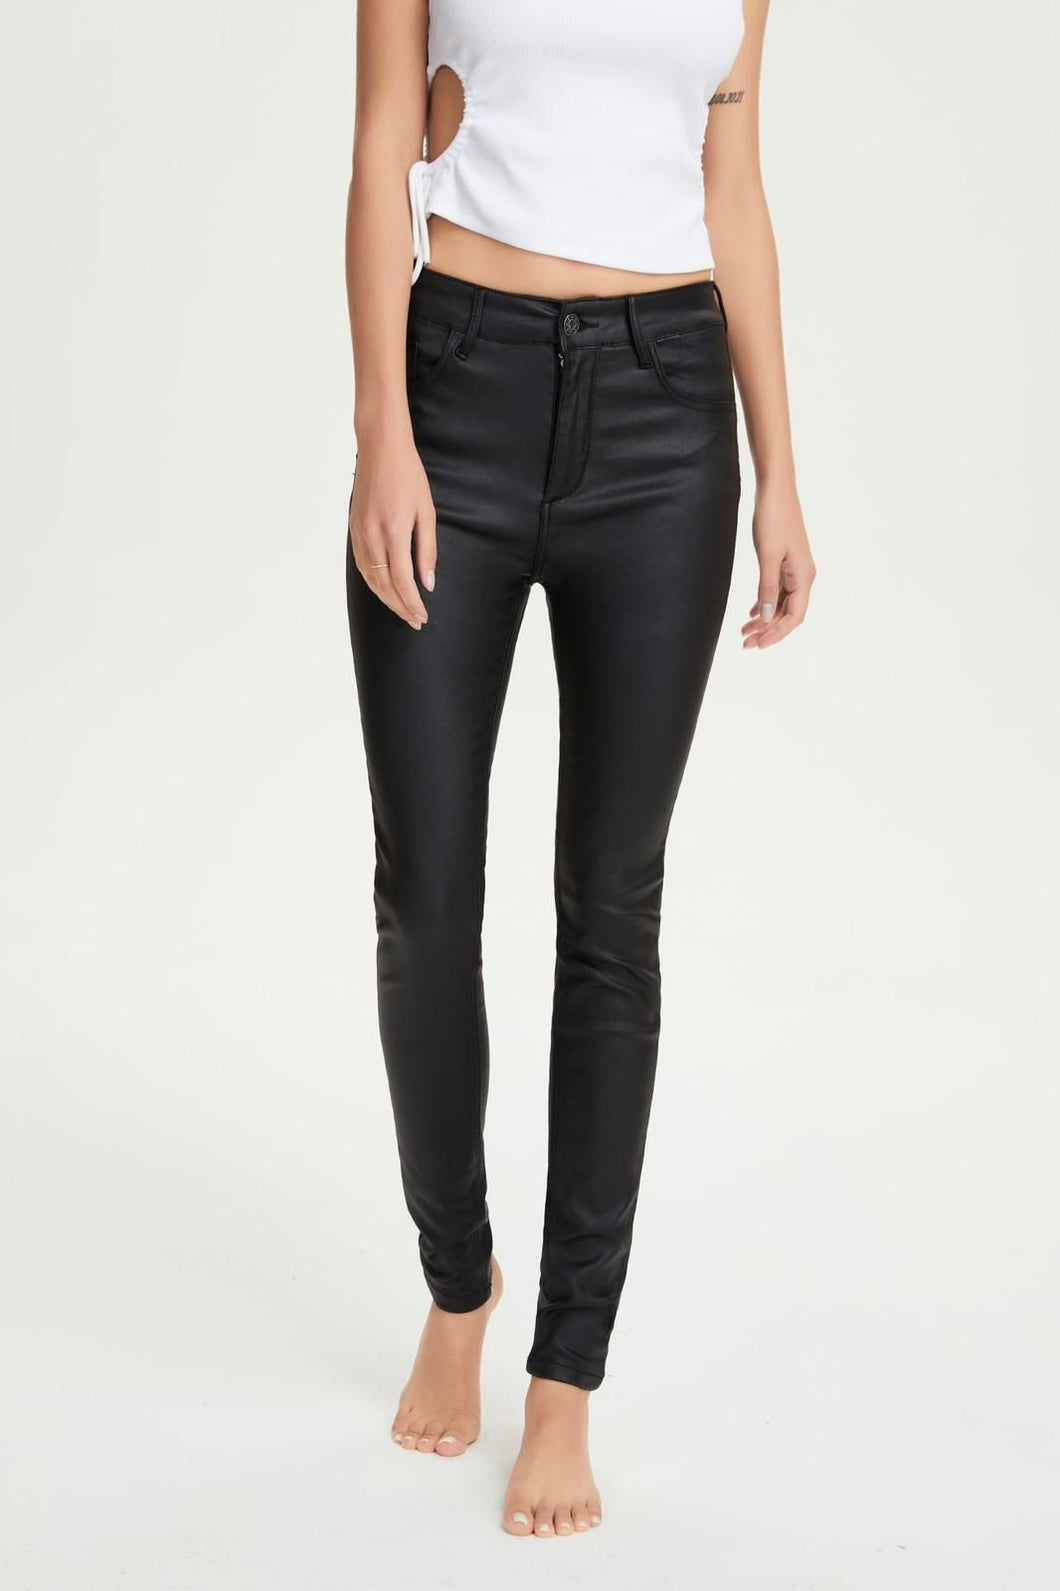 Melly leather one button jean